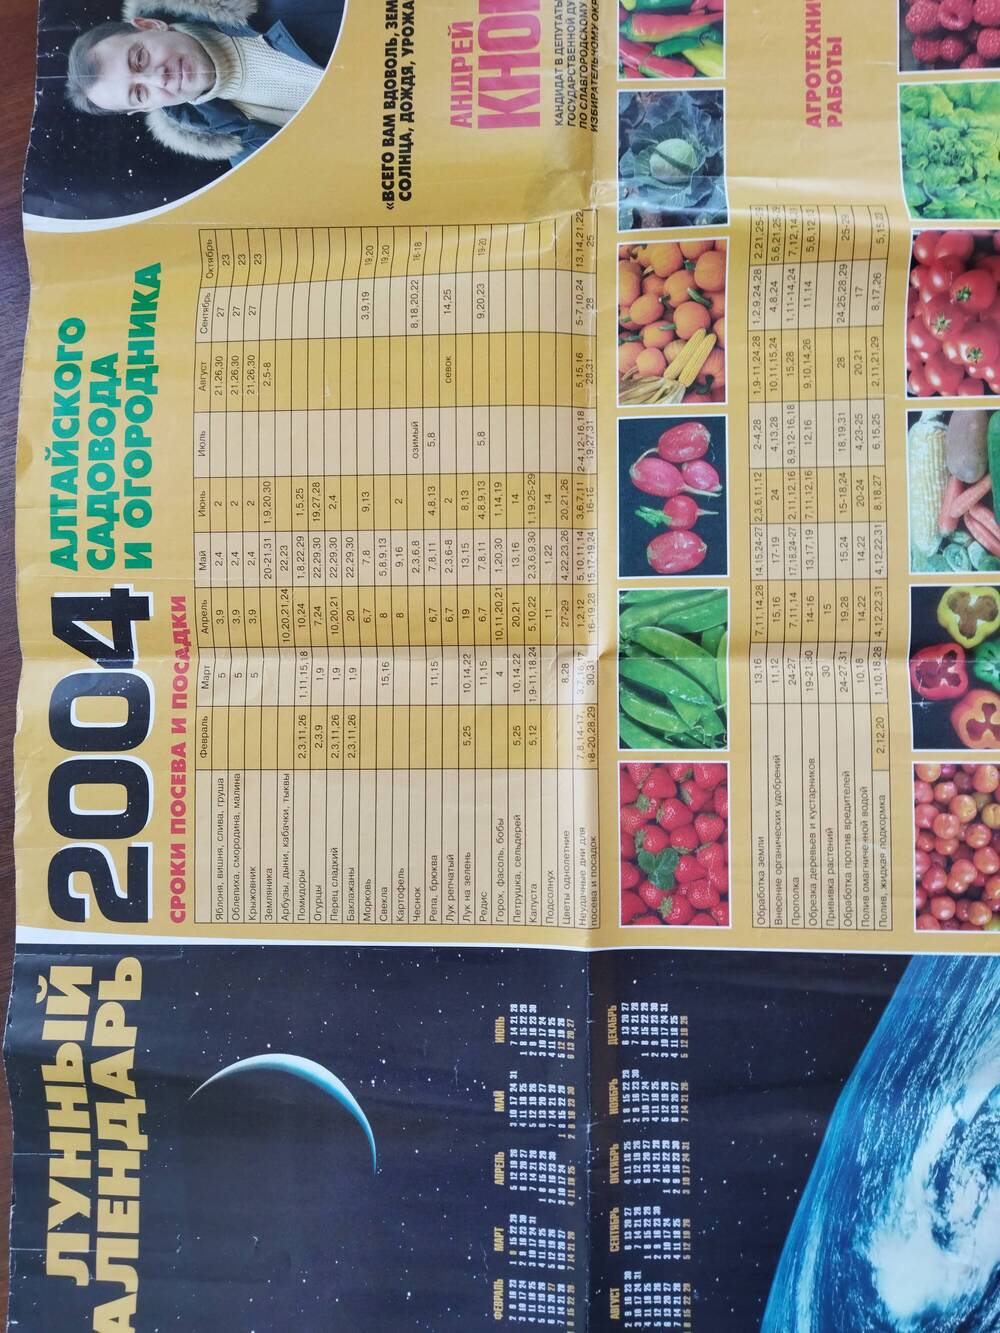 Wall calendar poster for the year 2004.